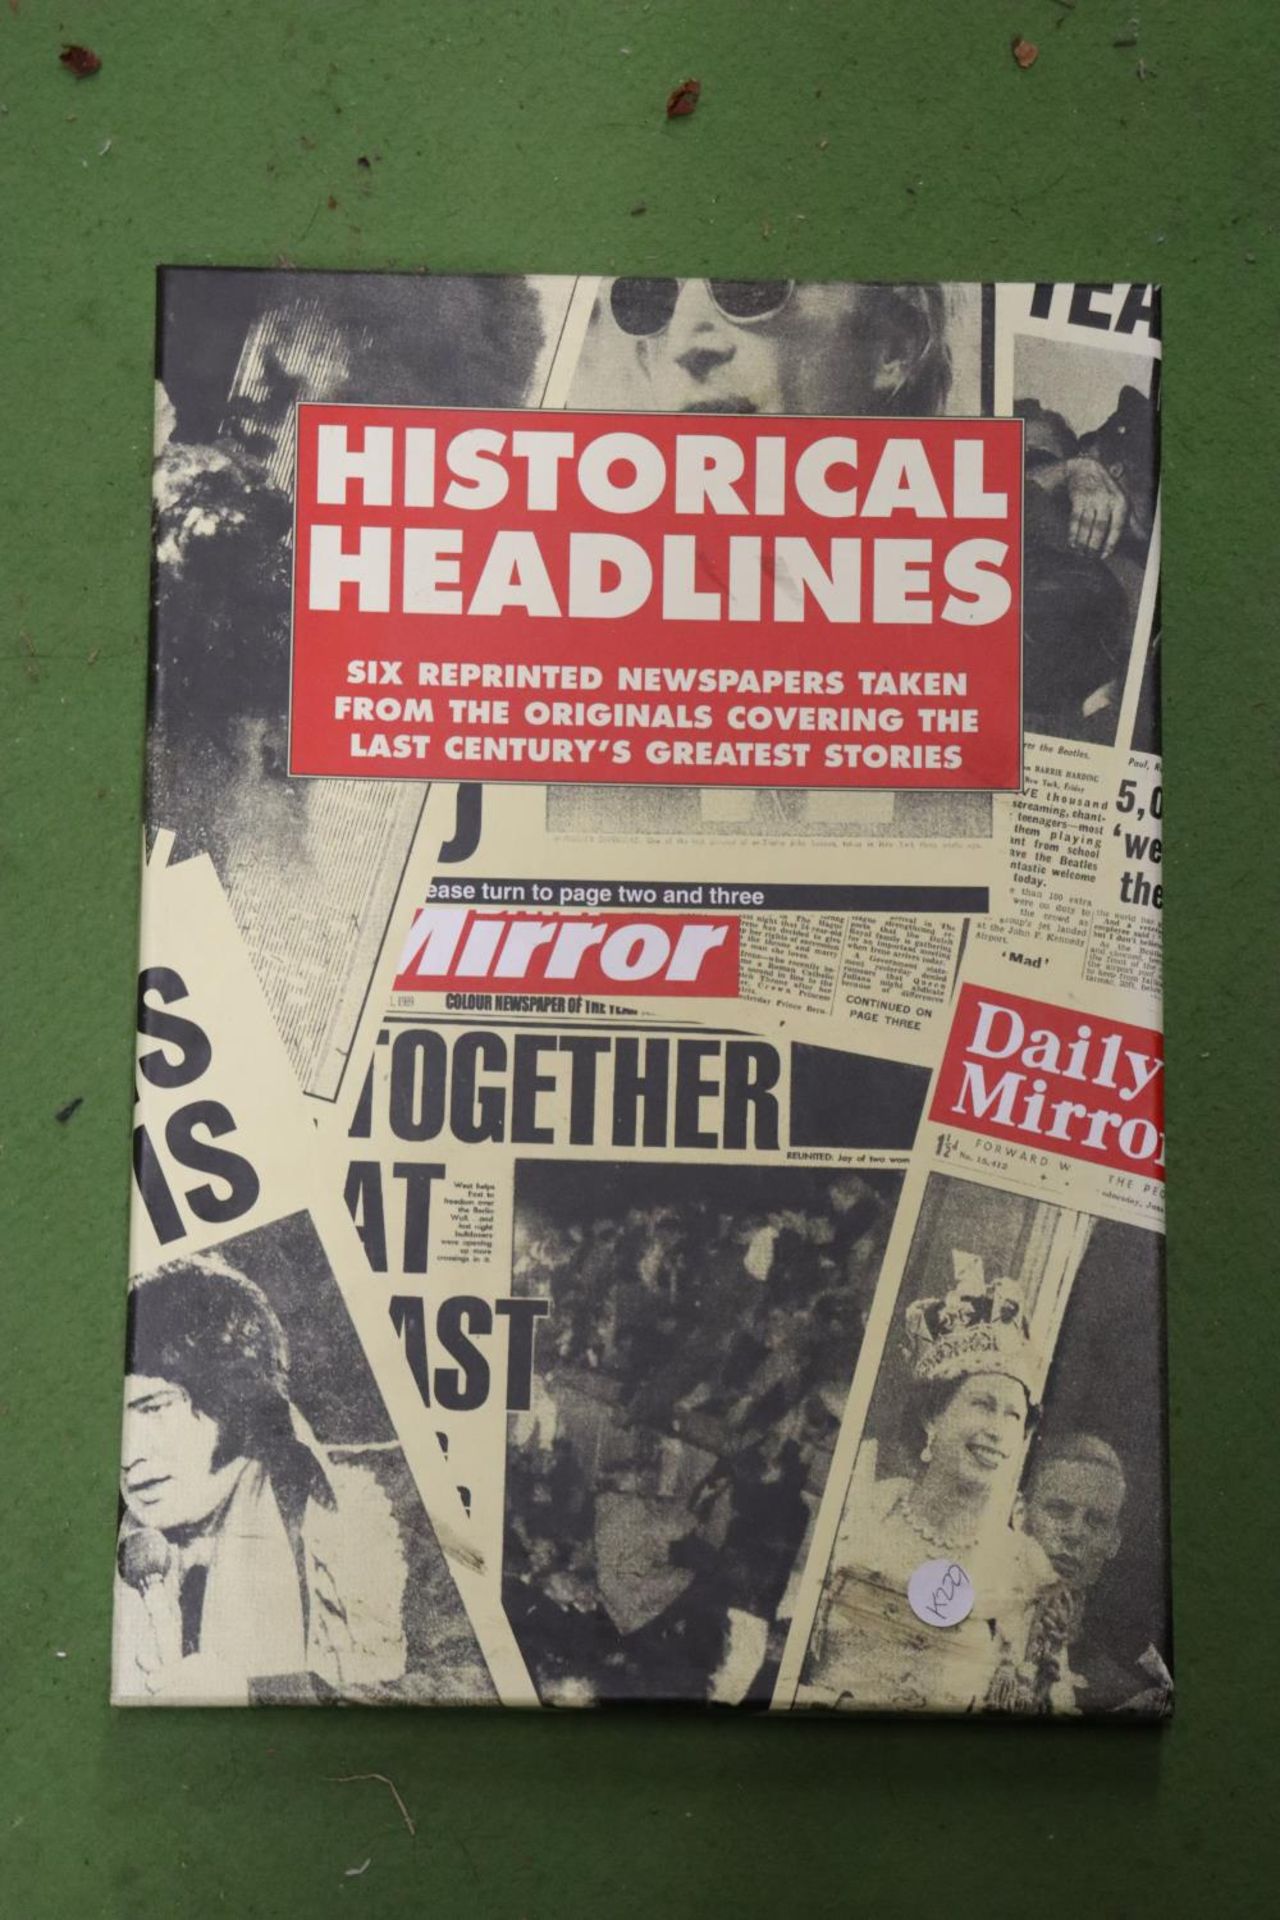 A BOXED 'HISTORIC HEADLINES' SET, WITH SIX REPRINTED NEWSPAPERS TAKEN FROM ORIGINALS, TO INCLUDE THE